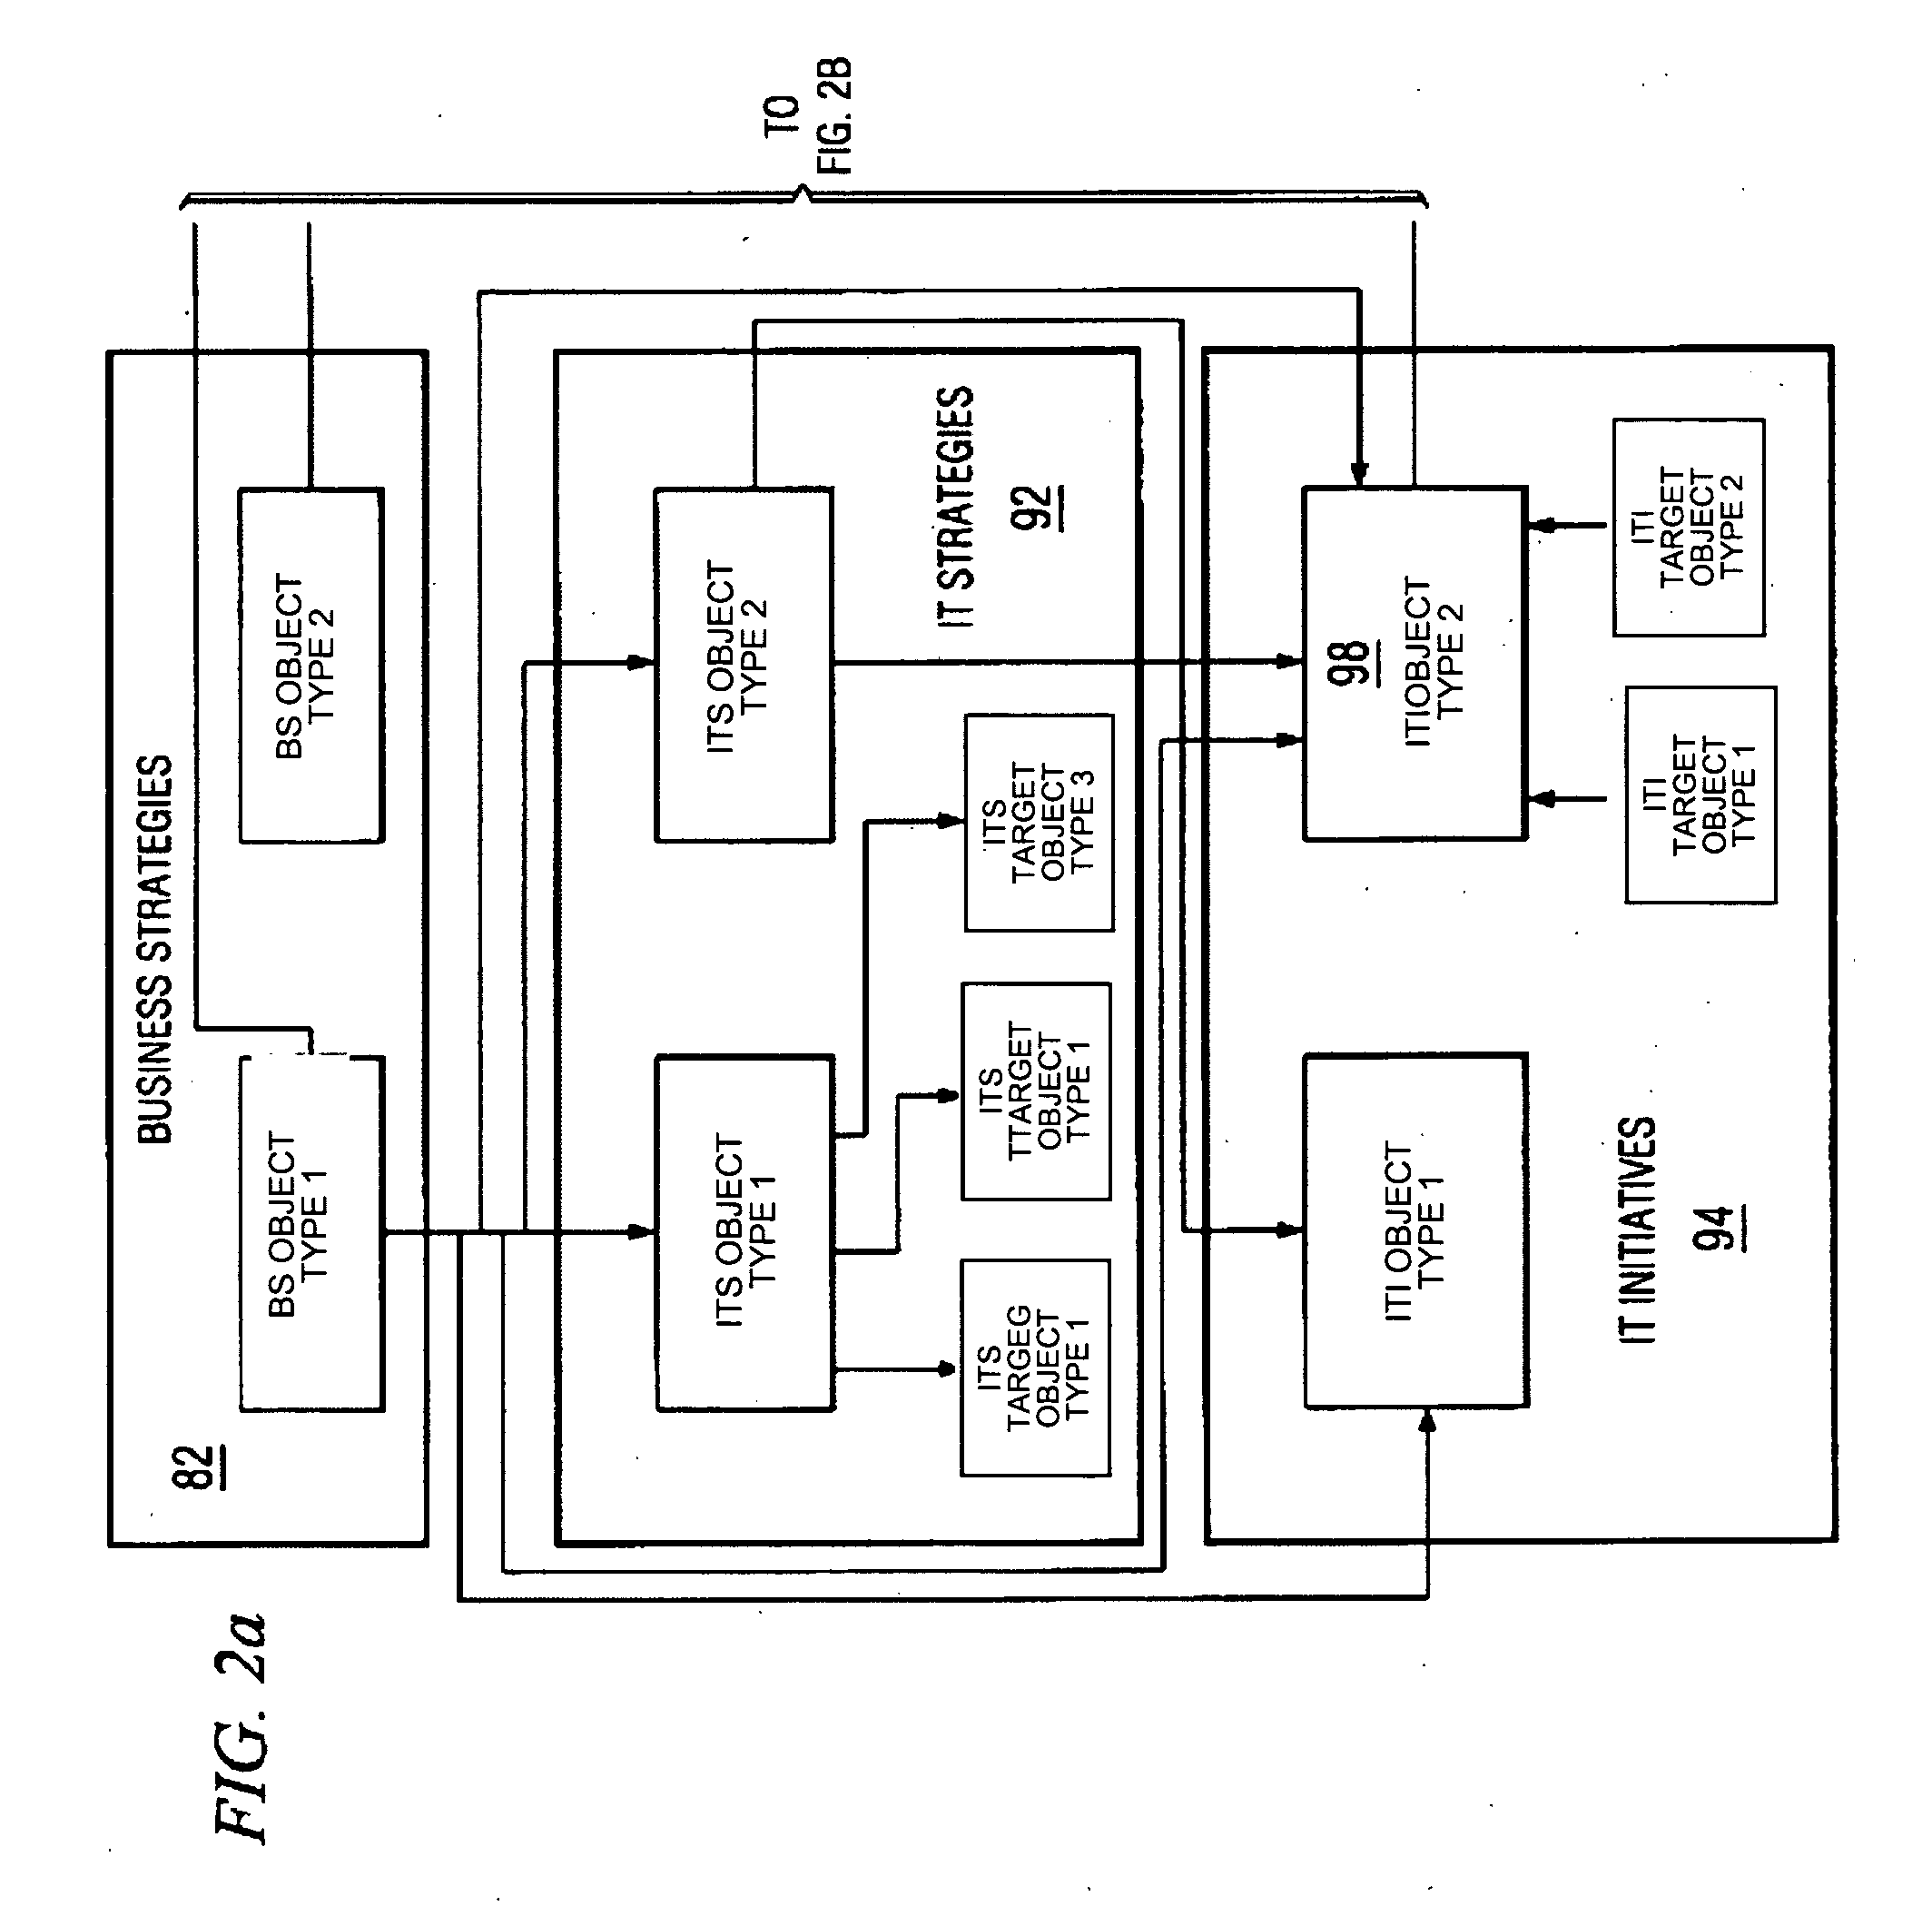 Method and system for tailoring metamodel requirements capture processing to varying users